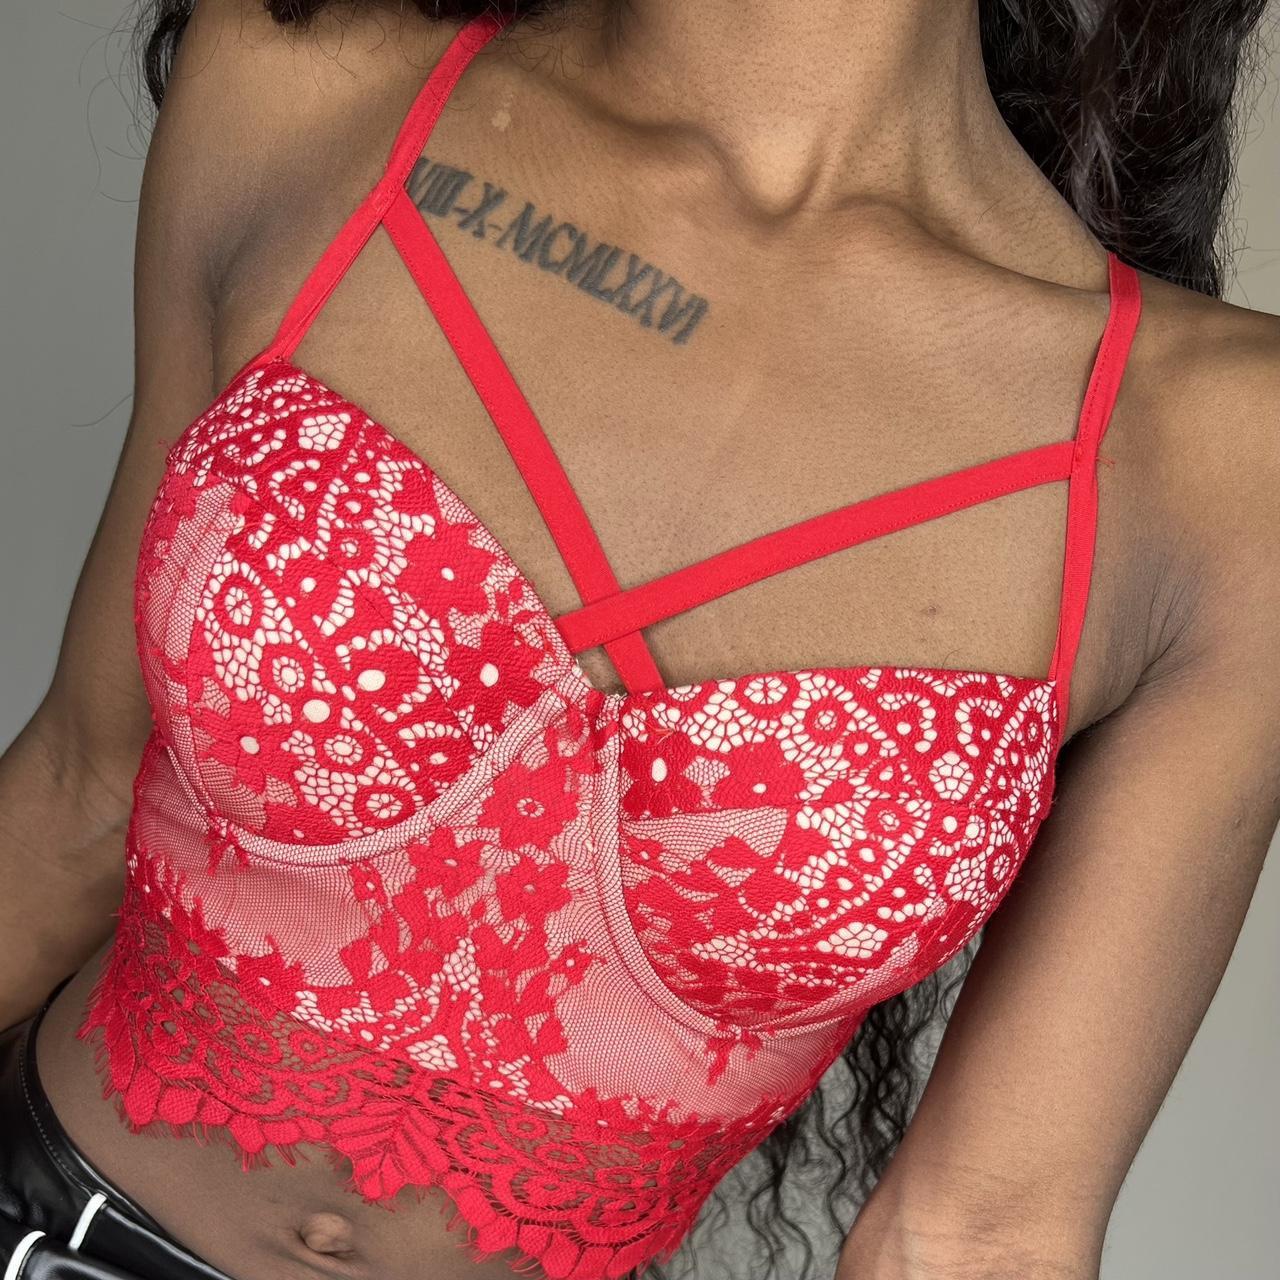 Red Lace Bustier Top - Red lace on top of a nude - Depop